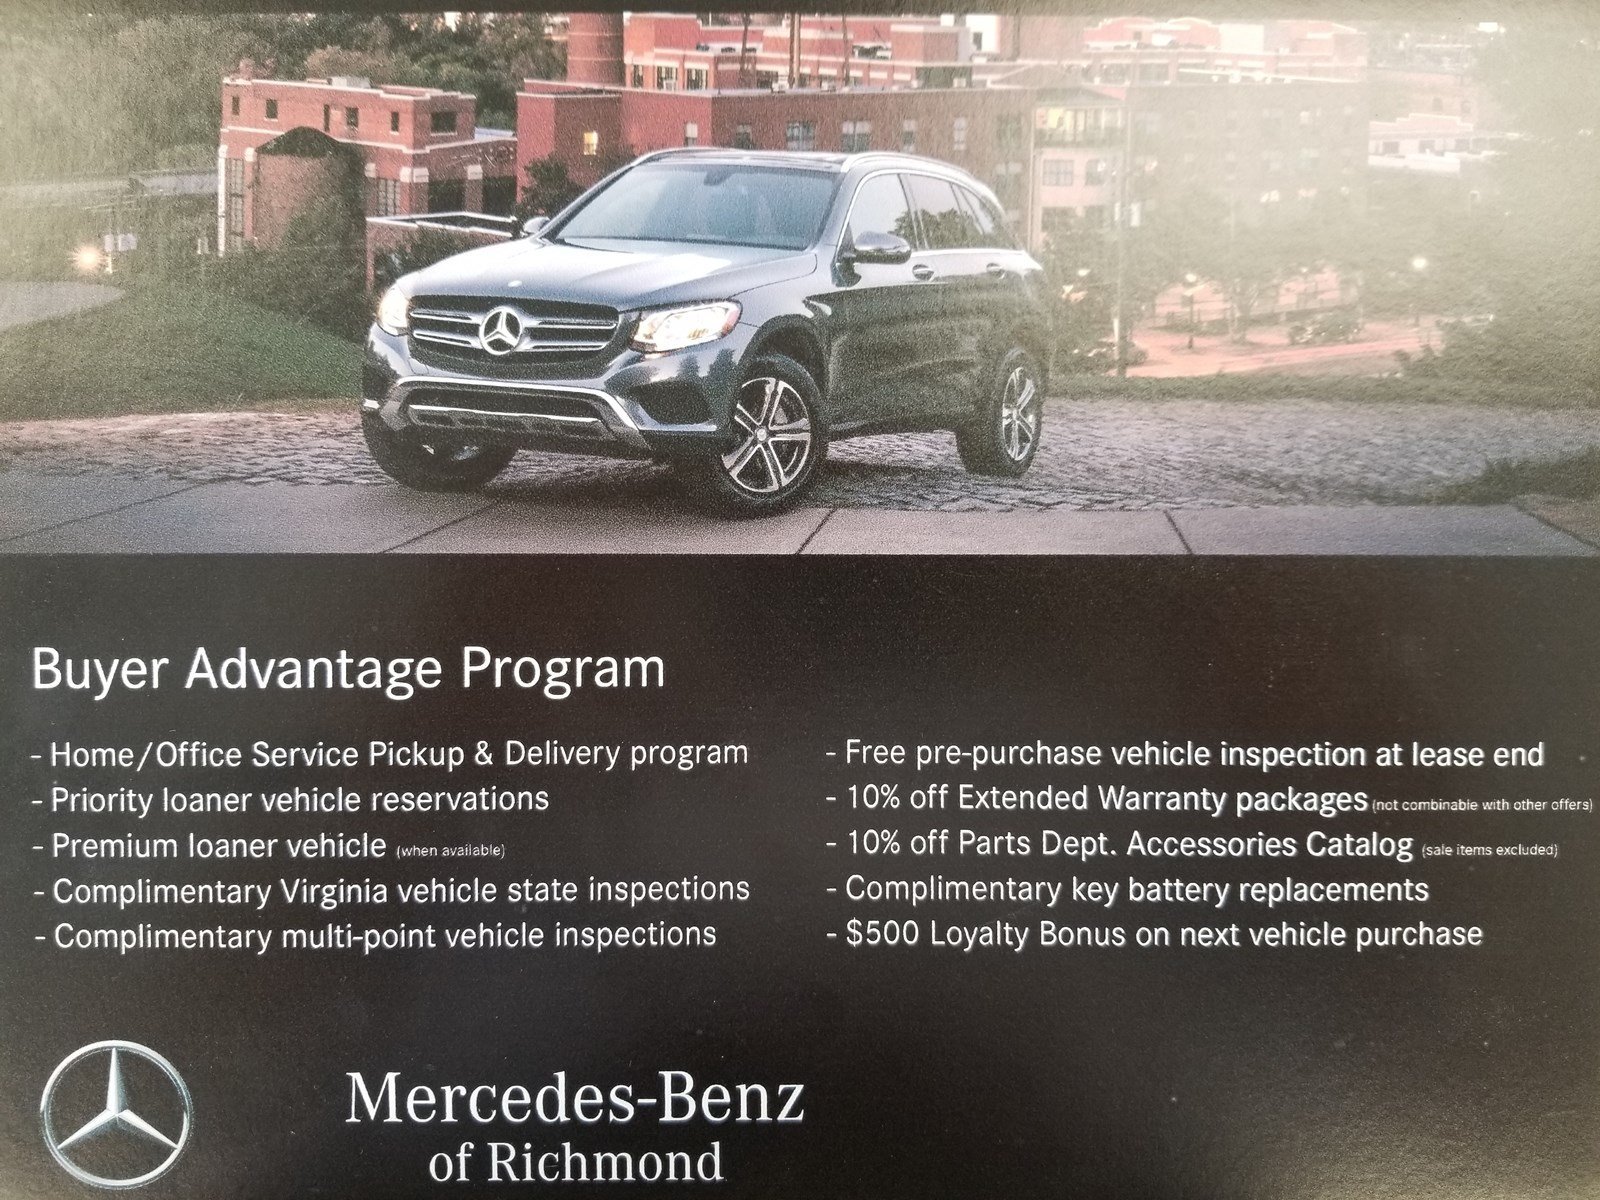 Complimentary Pickup/Delivery & Loaner Vehicles